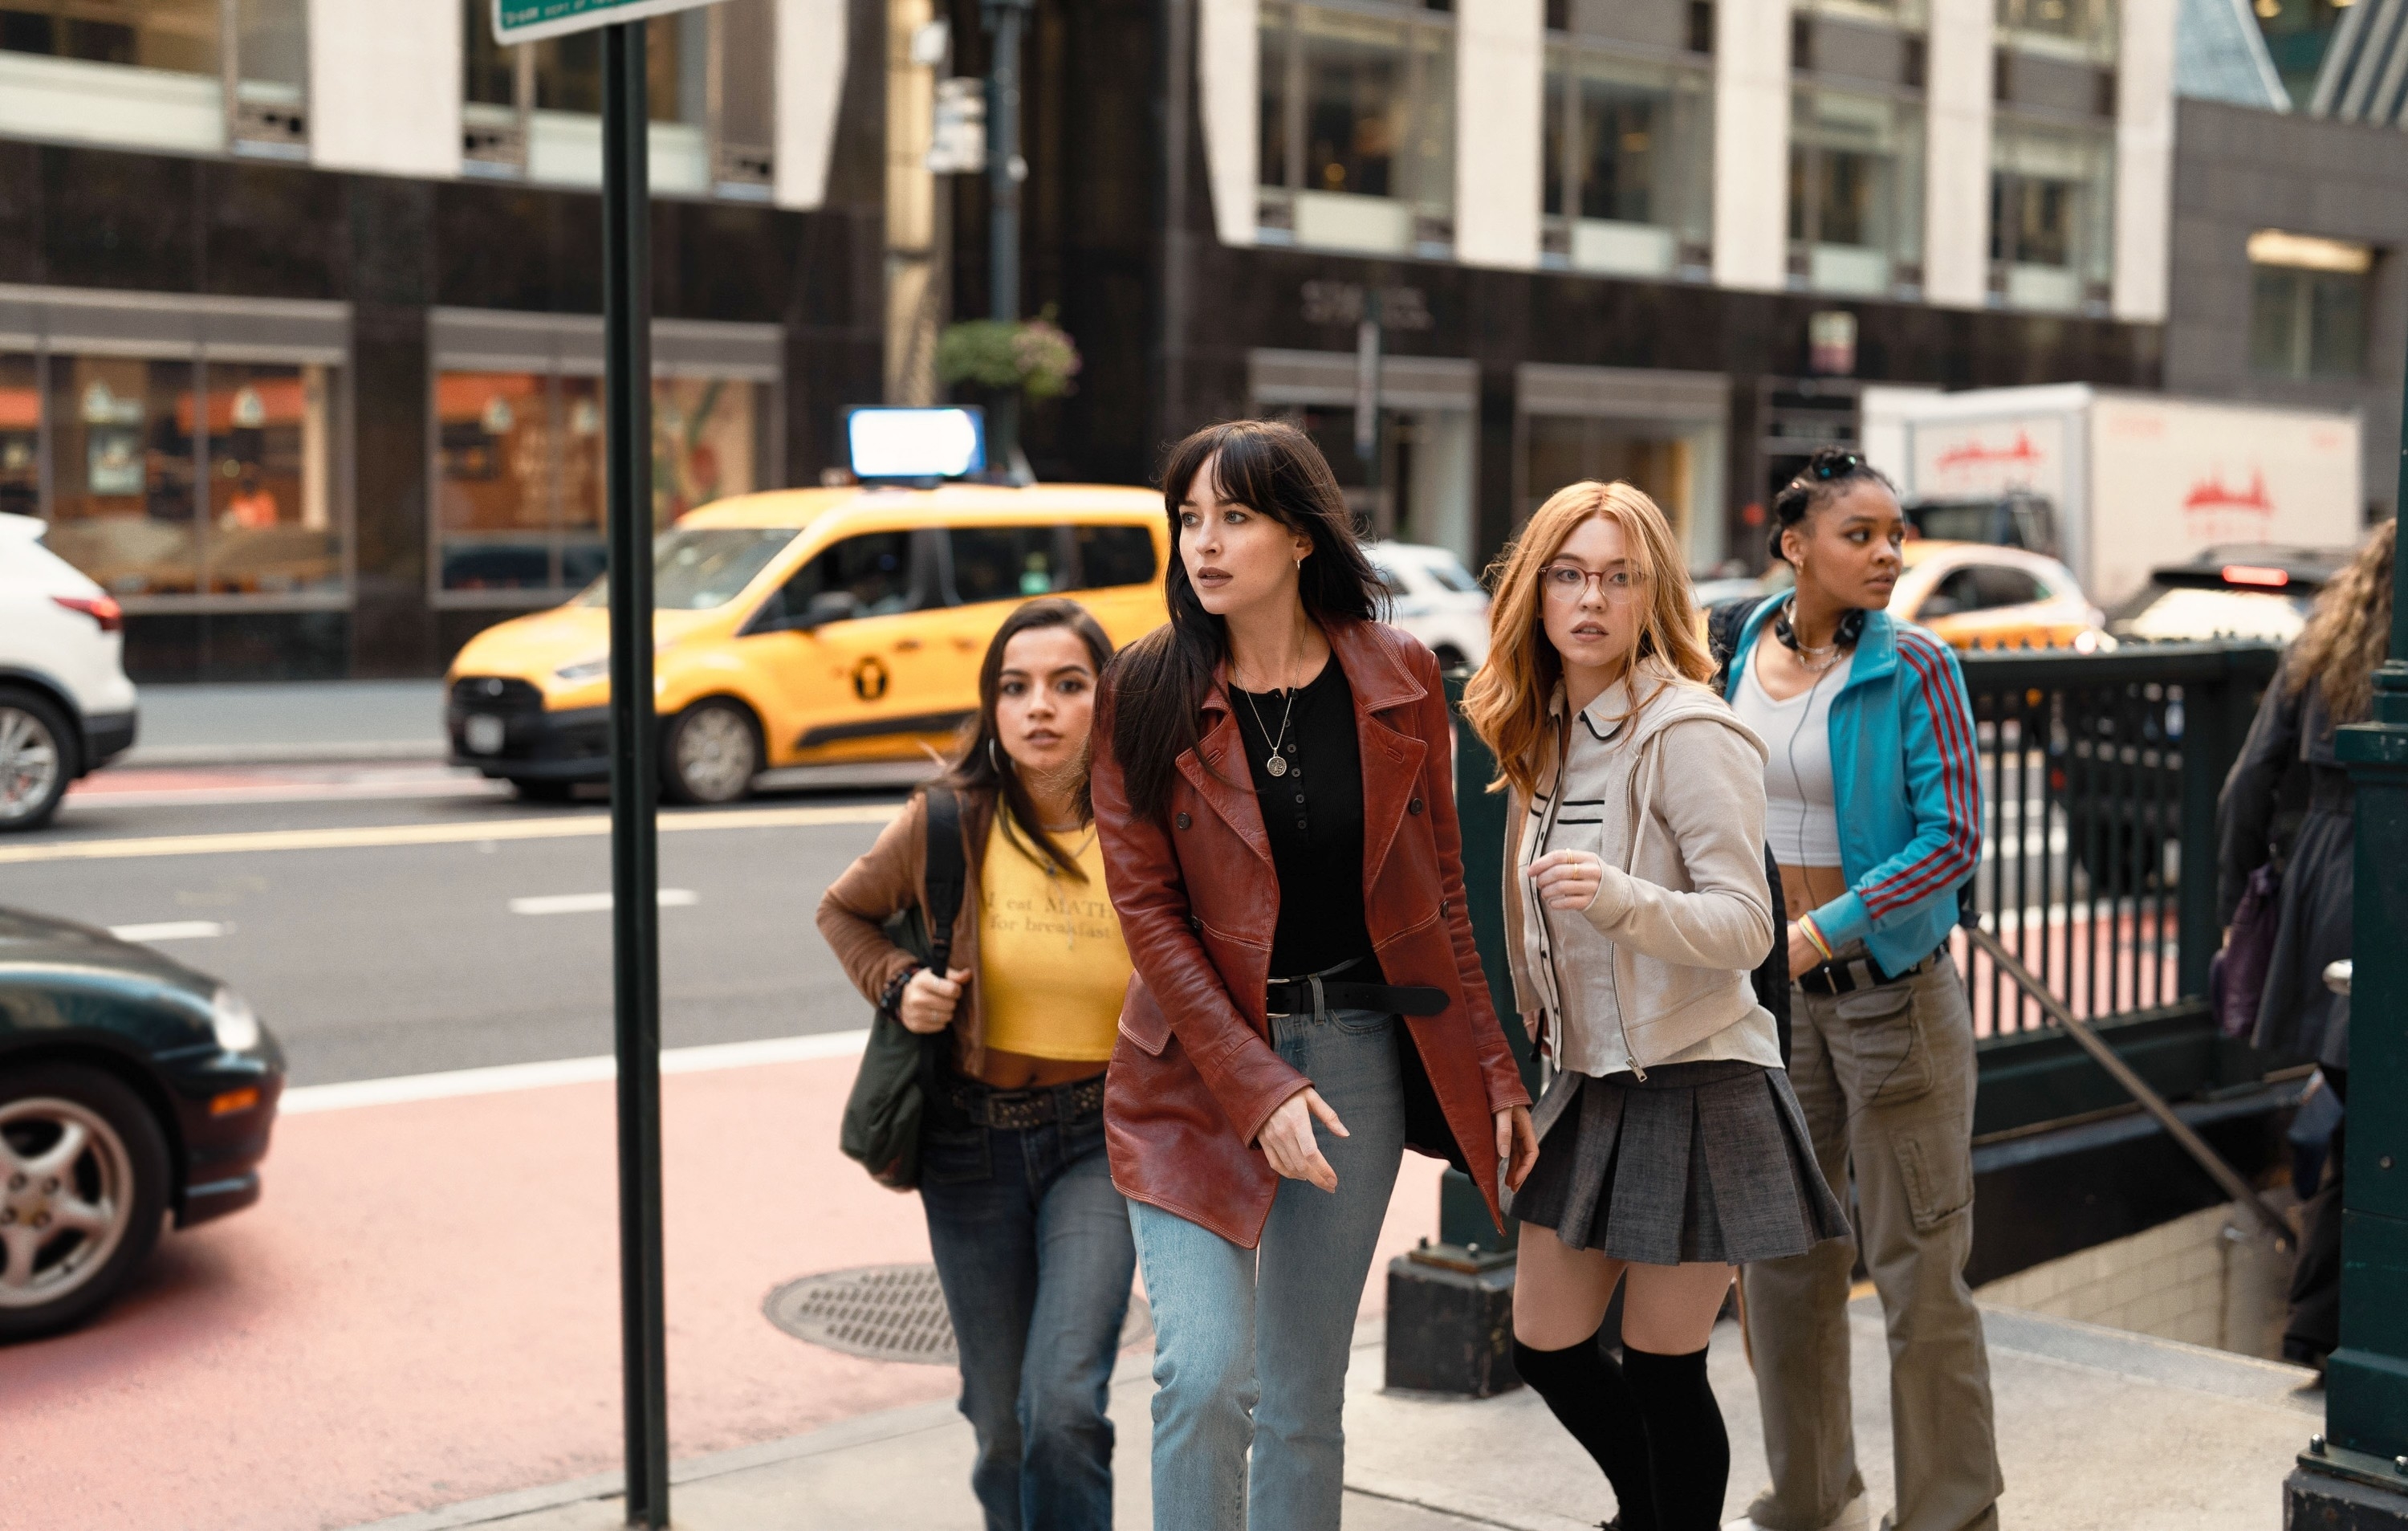 Four women from the movie walking on a city street, one in front leading the group